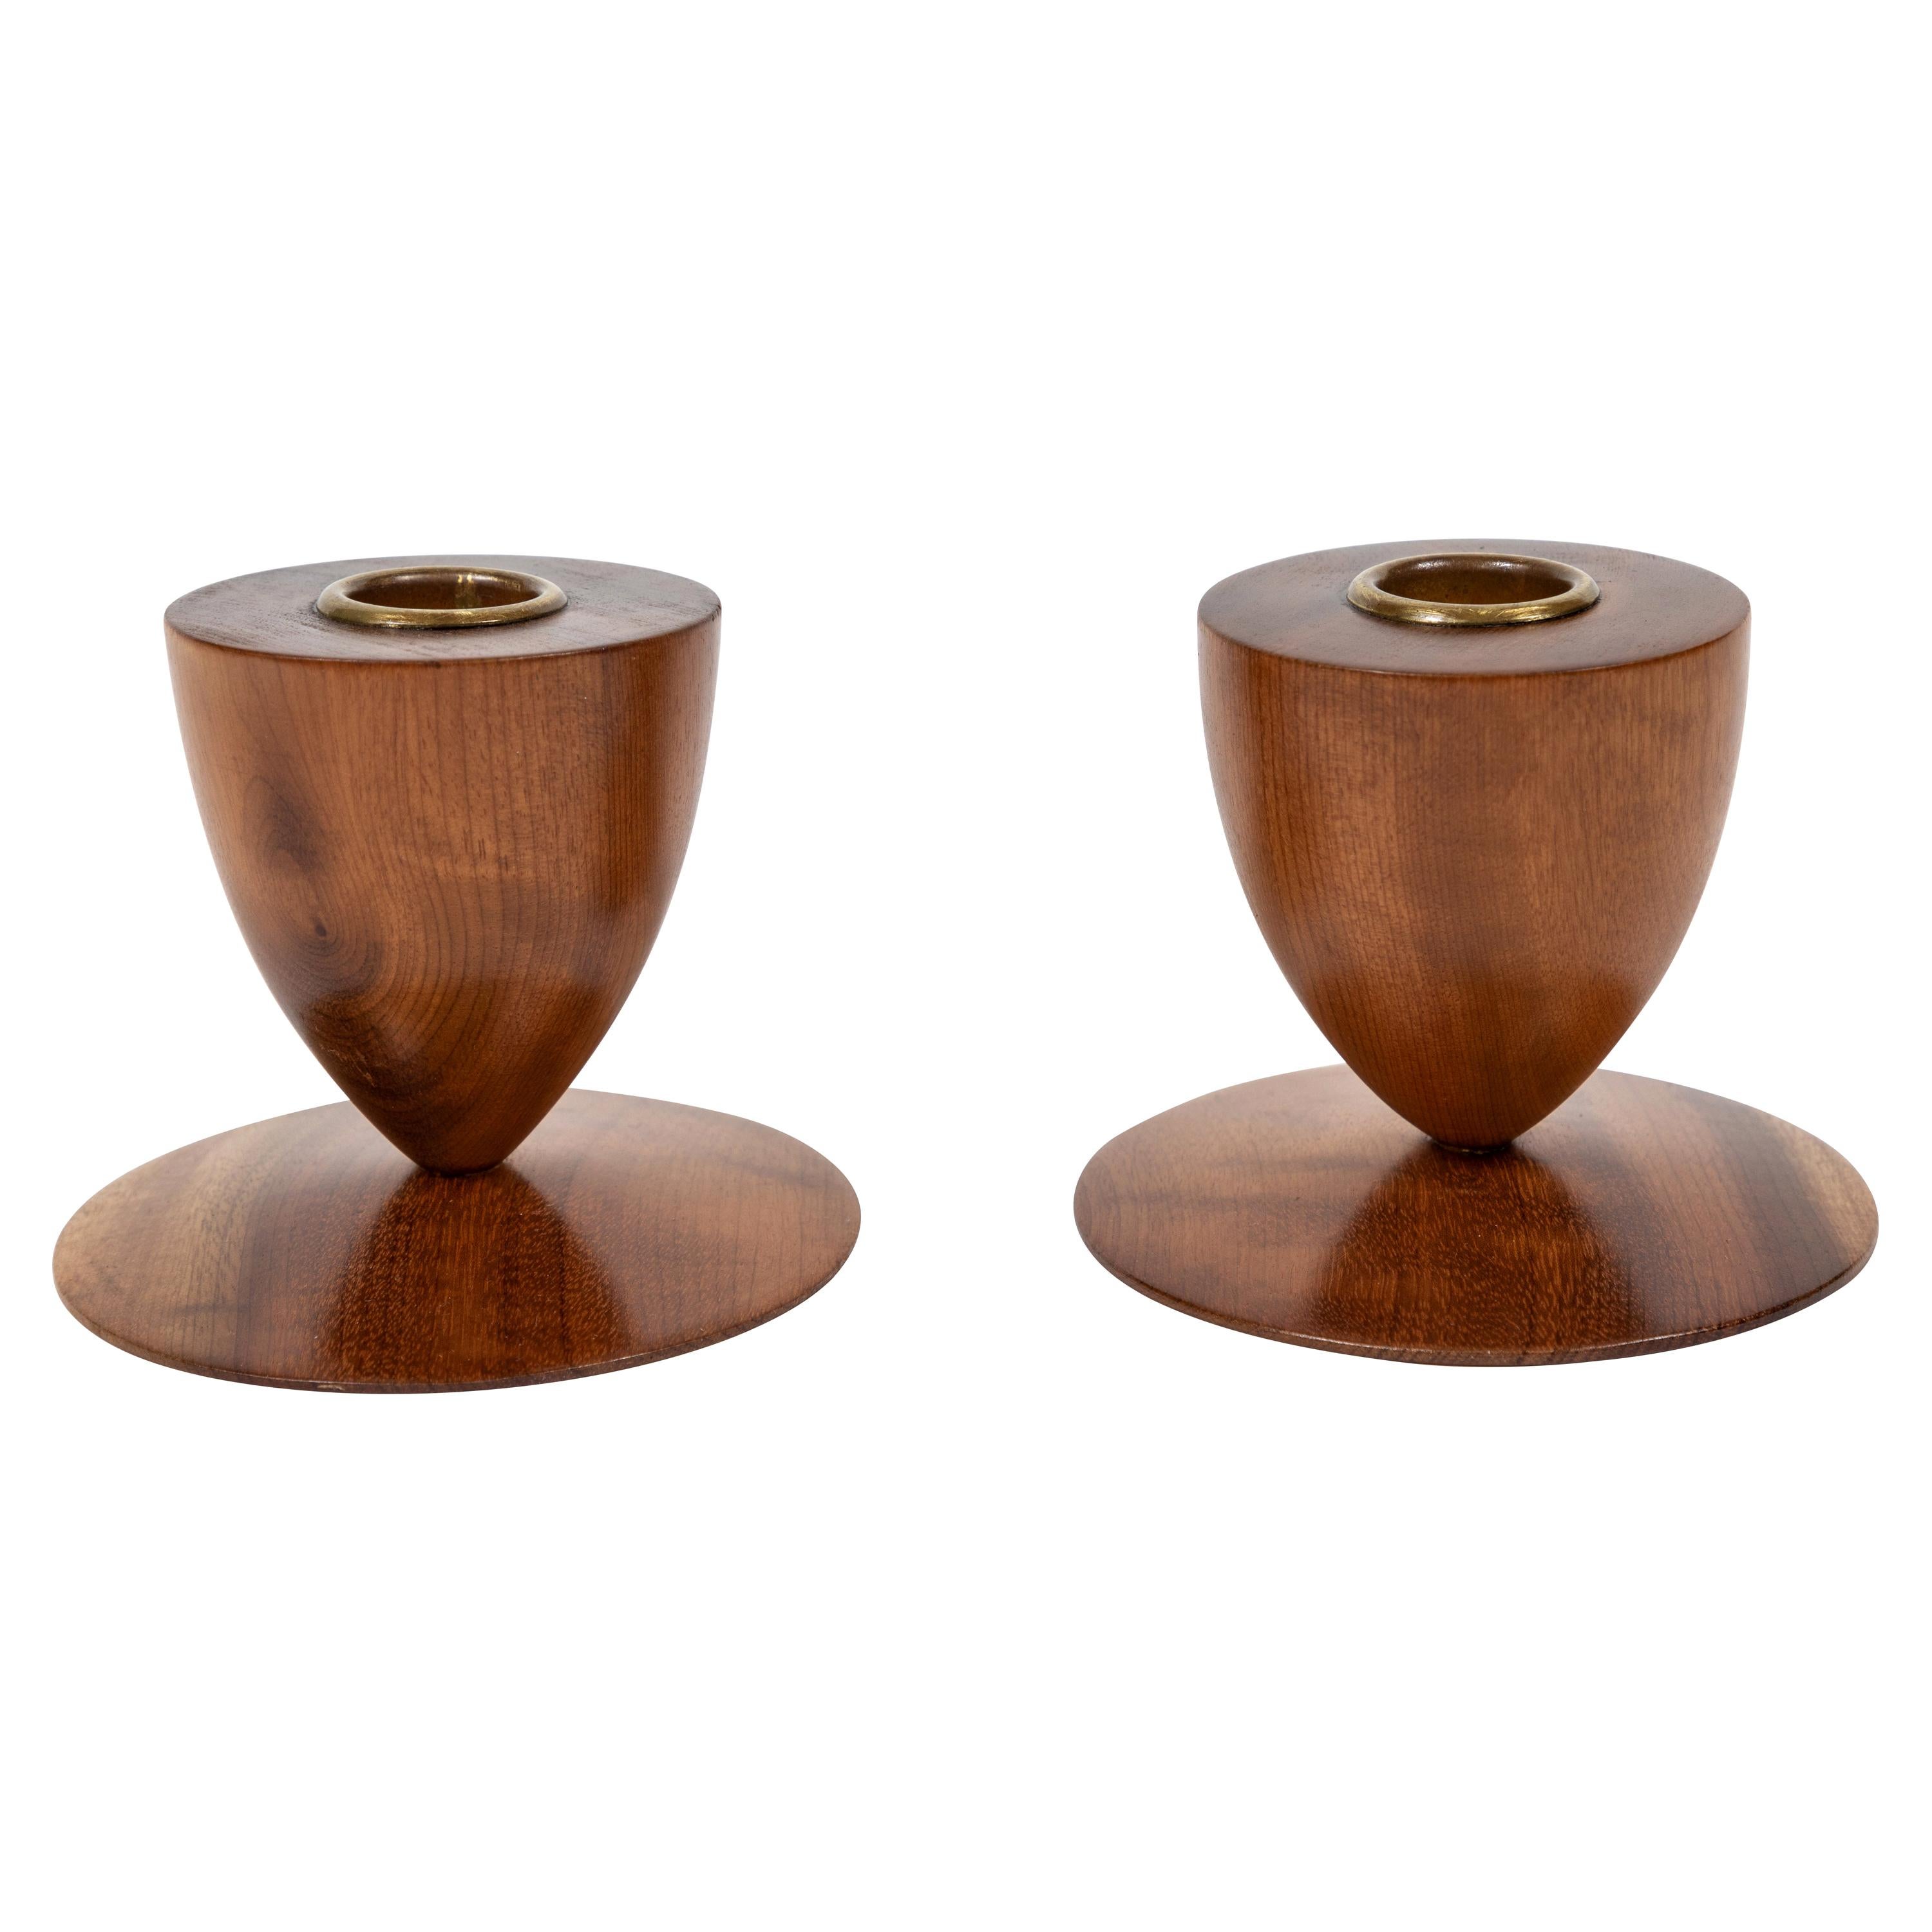 Pair of Midcentury Wood Footed Candleholders